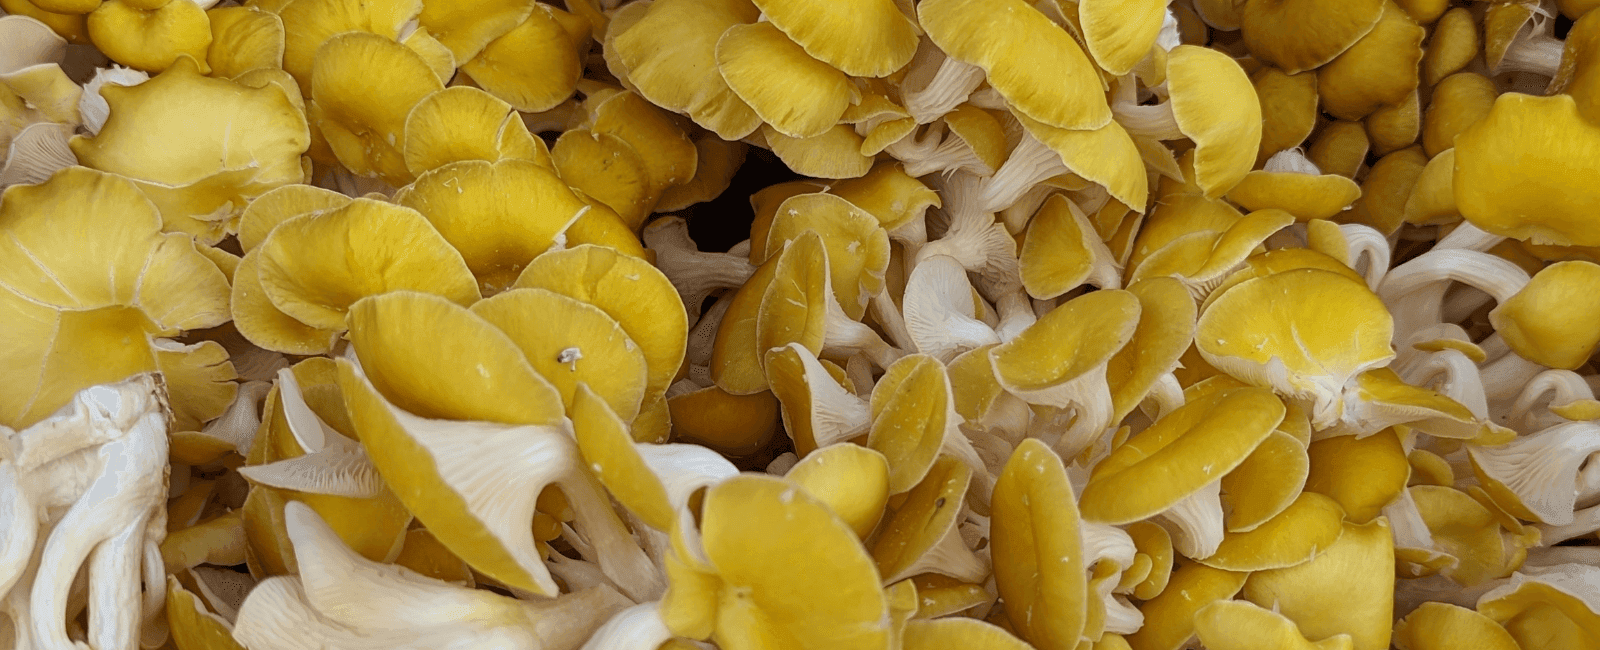 Concerns Rise as Golden Oyster Mushrooms Spread Across North America